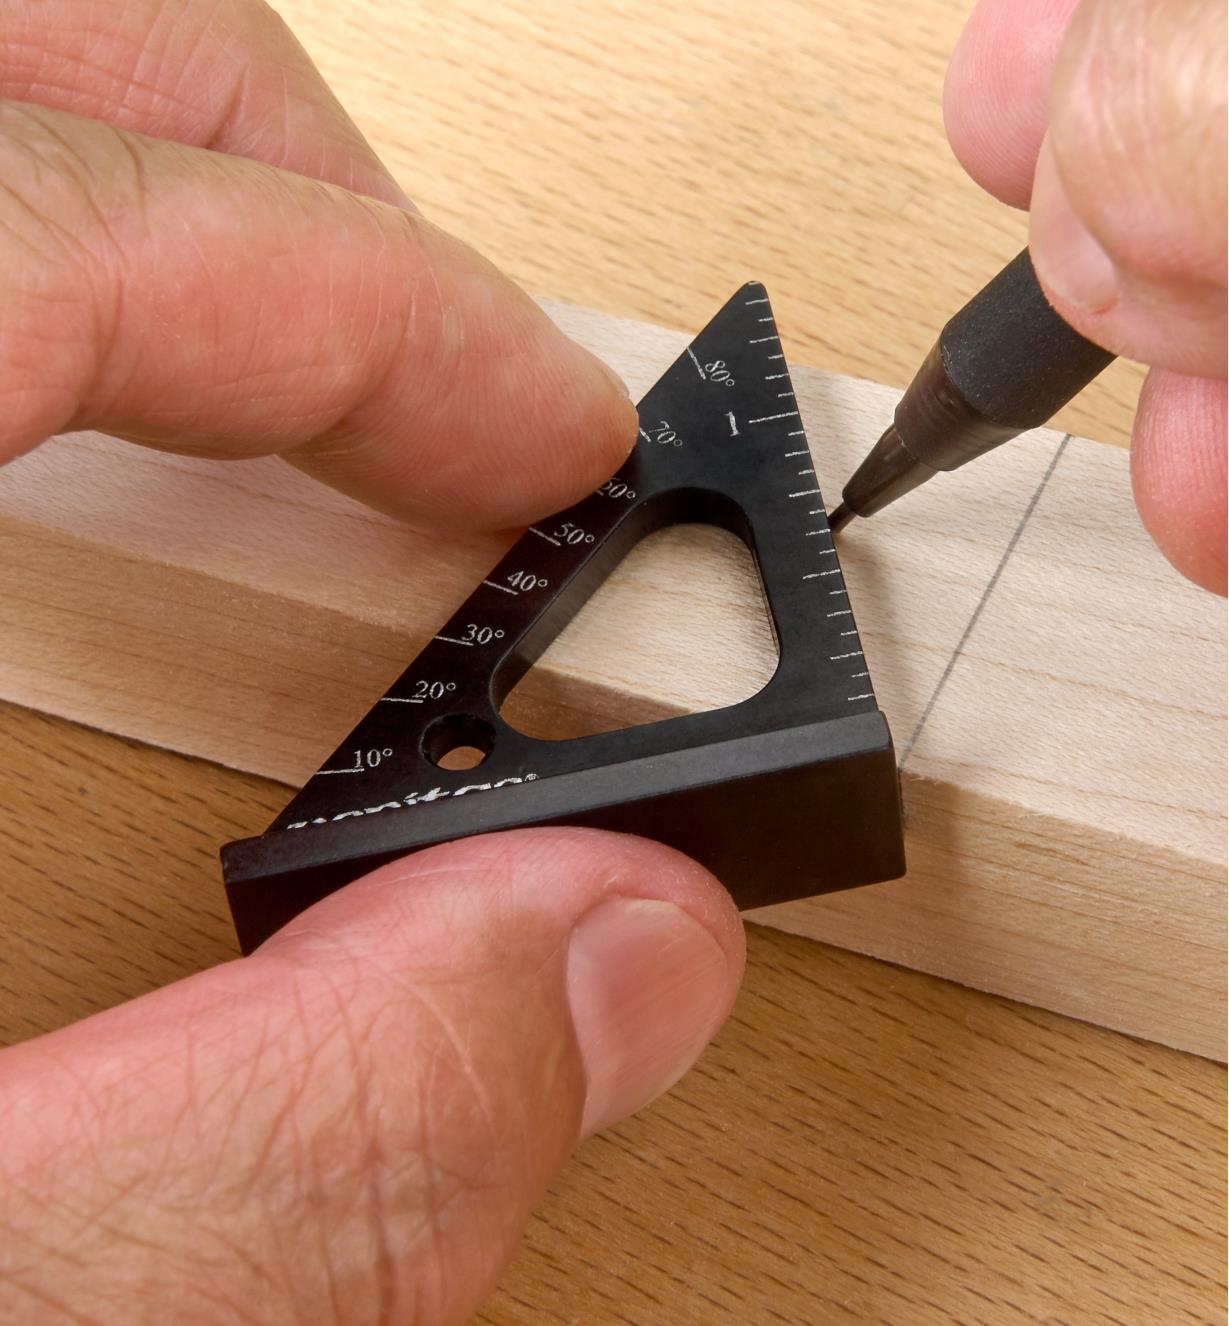 Using the protractor scale marked on a 1 1/2"" Pocket Layout Square to lay out an angled cut line